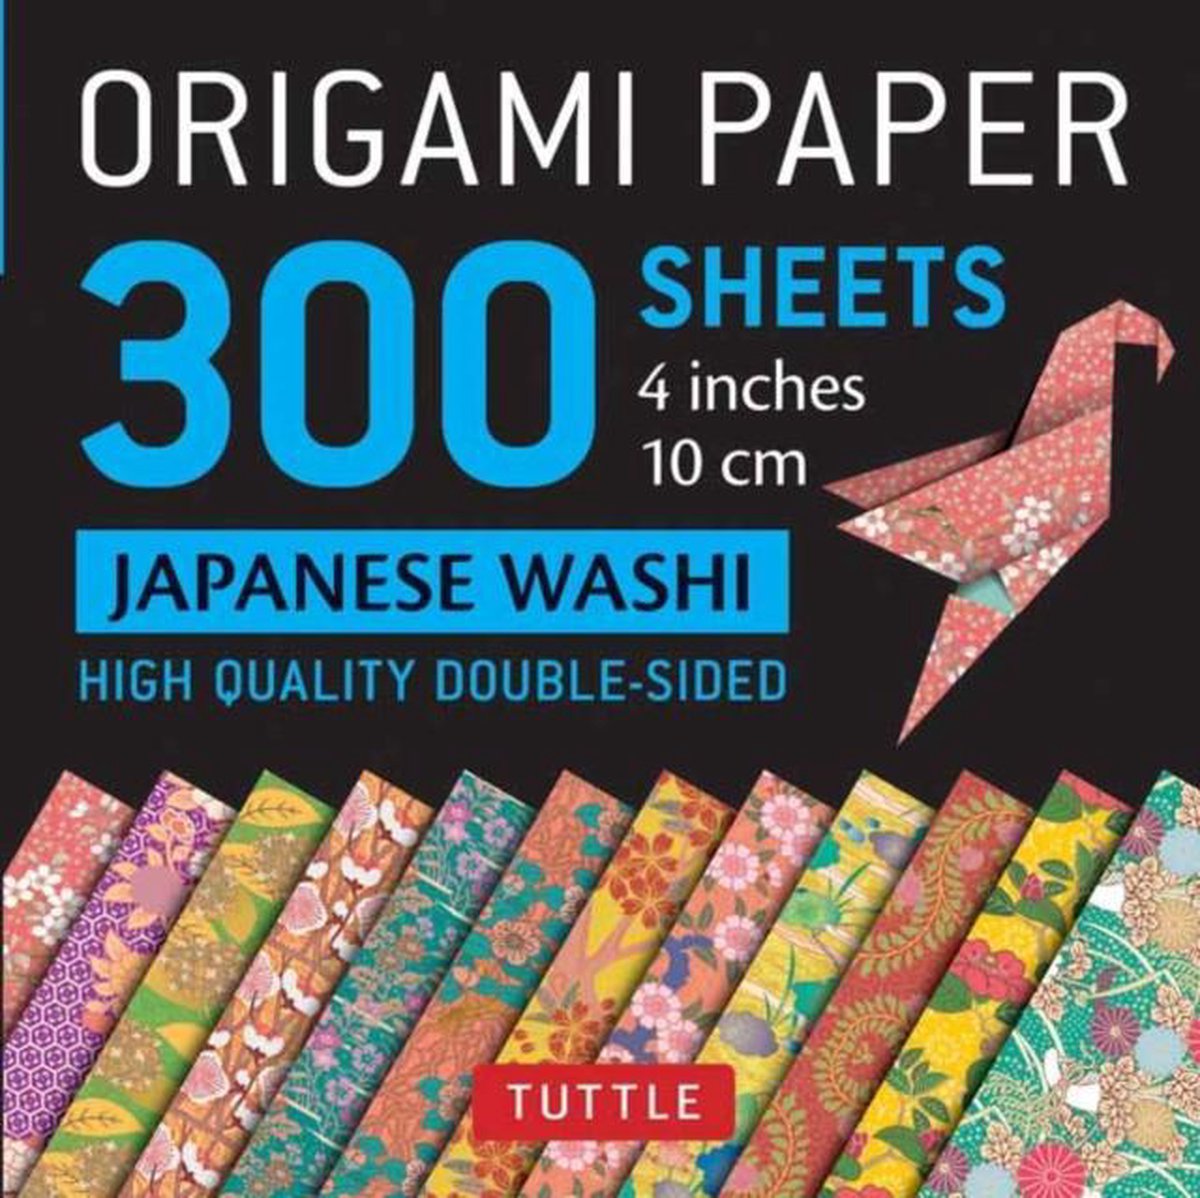 Origami Paper 300 Sheets Japanese Washi Patterns 4 (10 CM): Tuttle Origami Paper: Double-Sided Origami Sheets Printed with 12 Different Designs - Tuttle Publishing